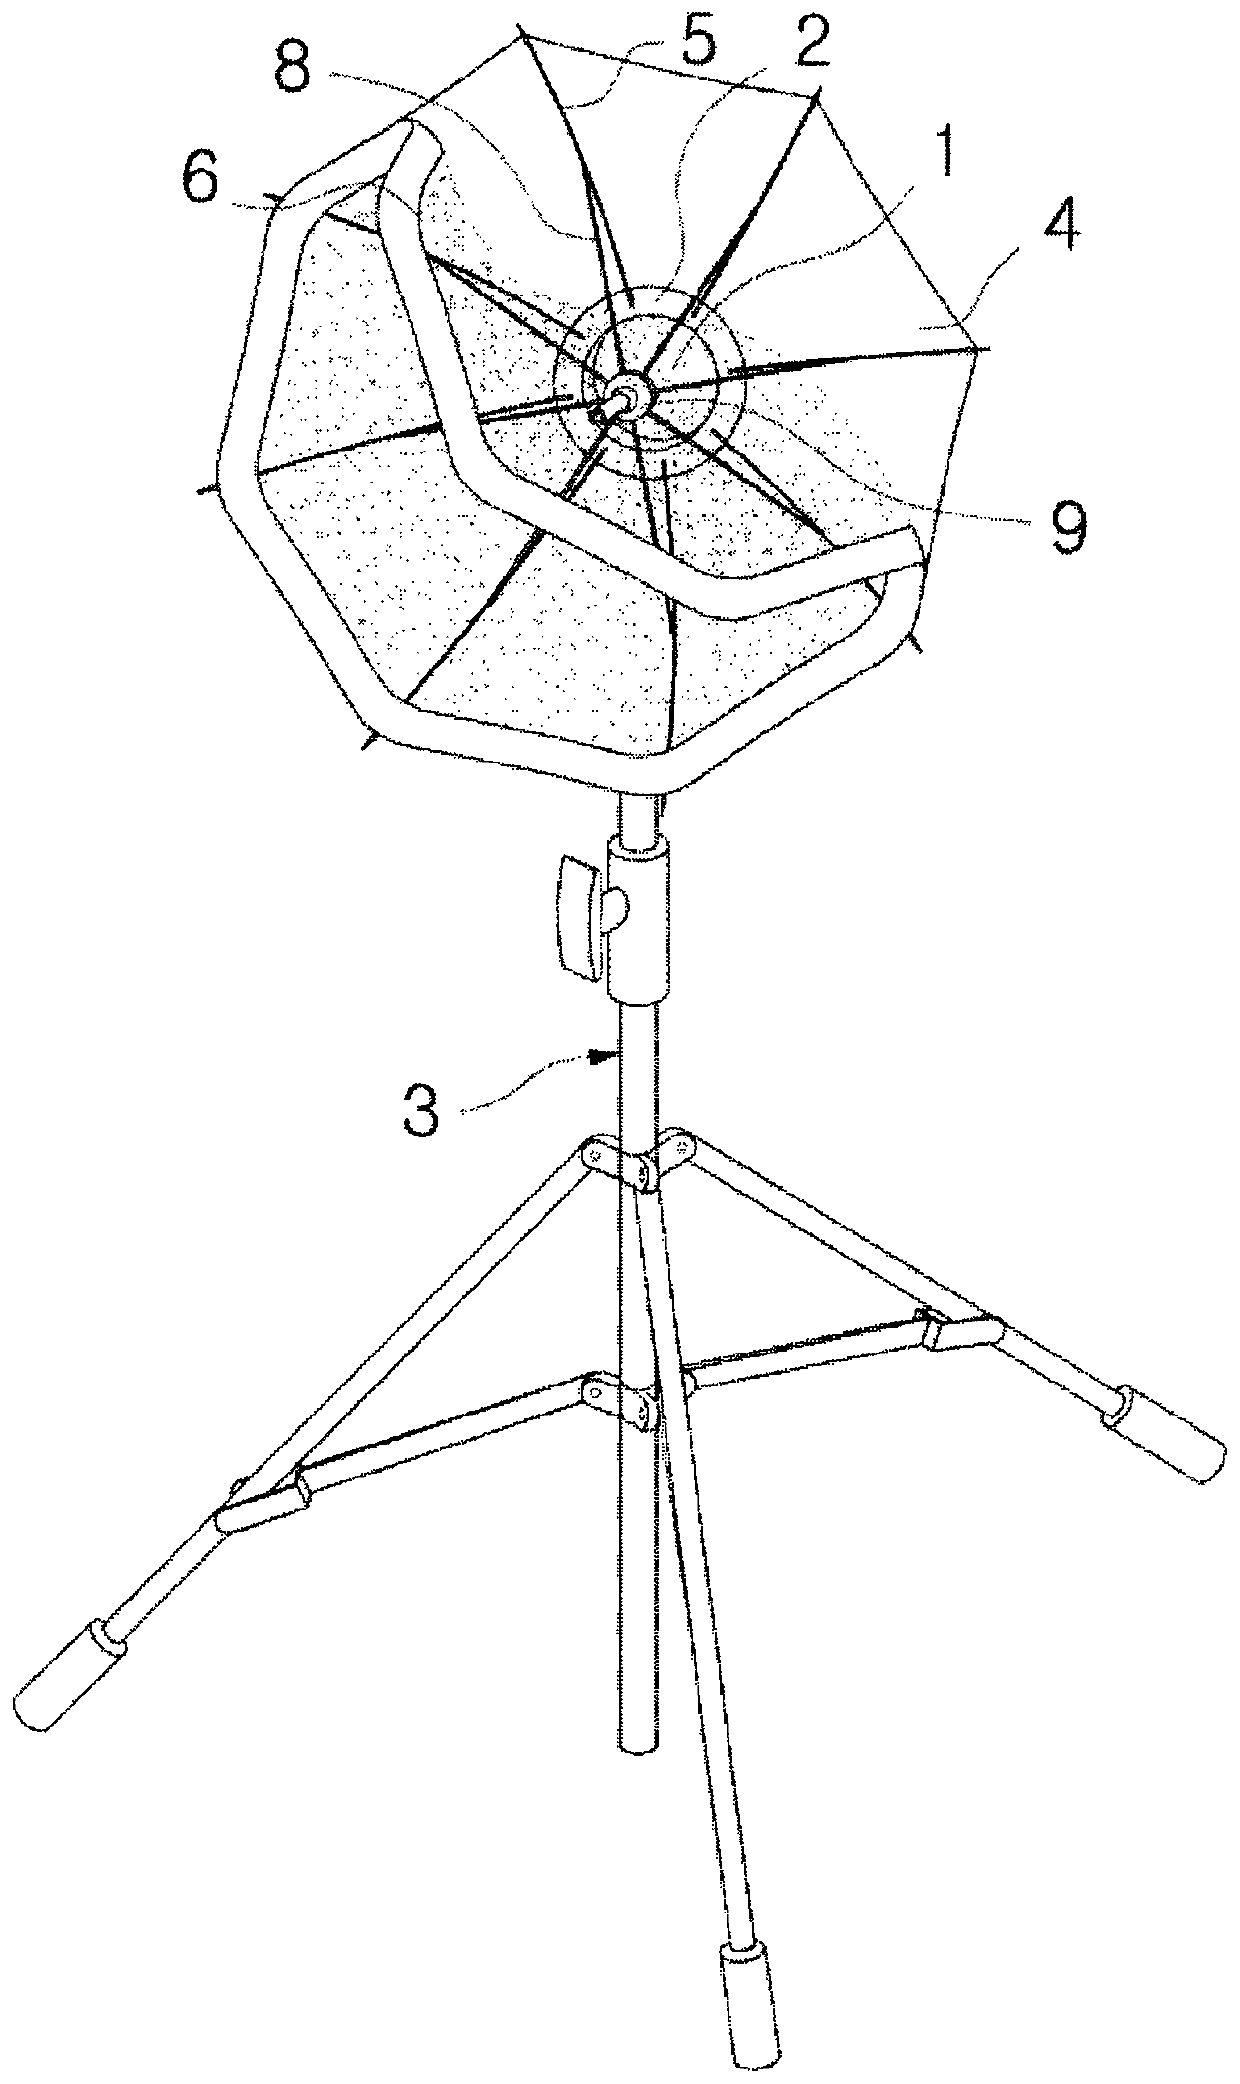 Multi-soft box device for photography